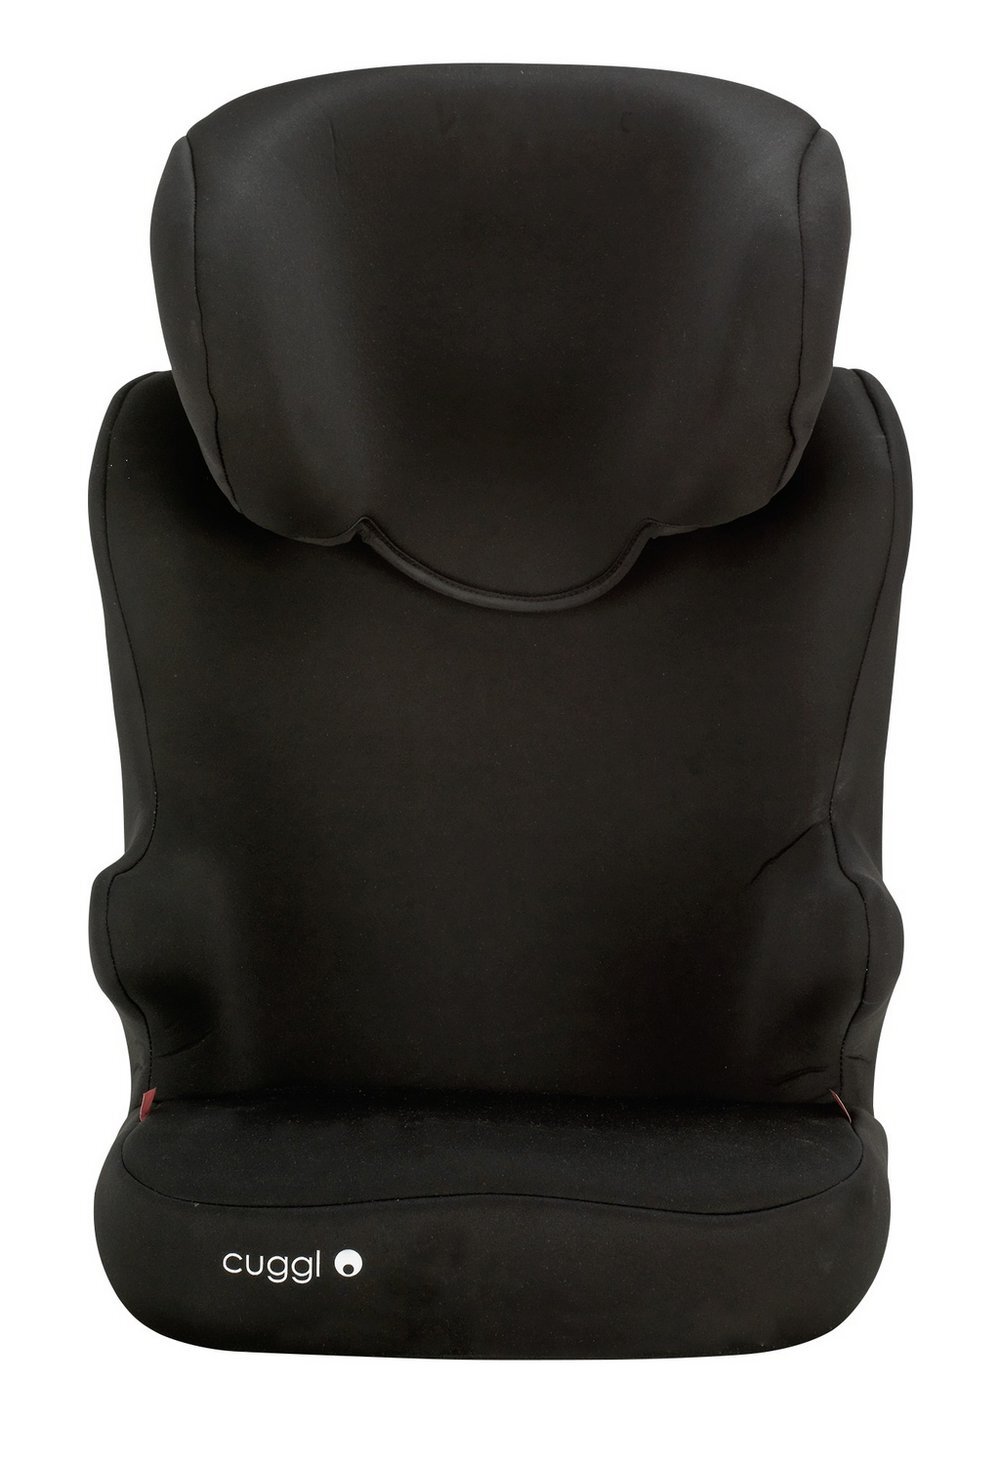 NEW CUGGL SWALLOW GROUP 2/3 BABY CAR SEAT £26.99 Inc Vat & Del